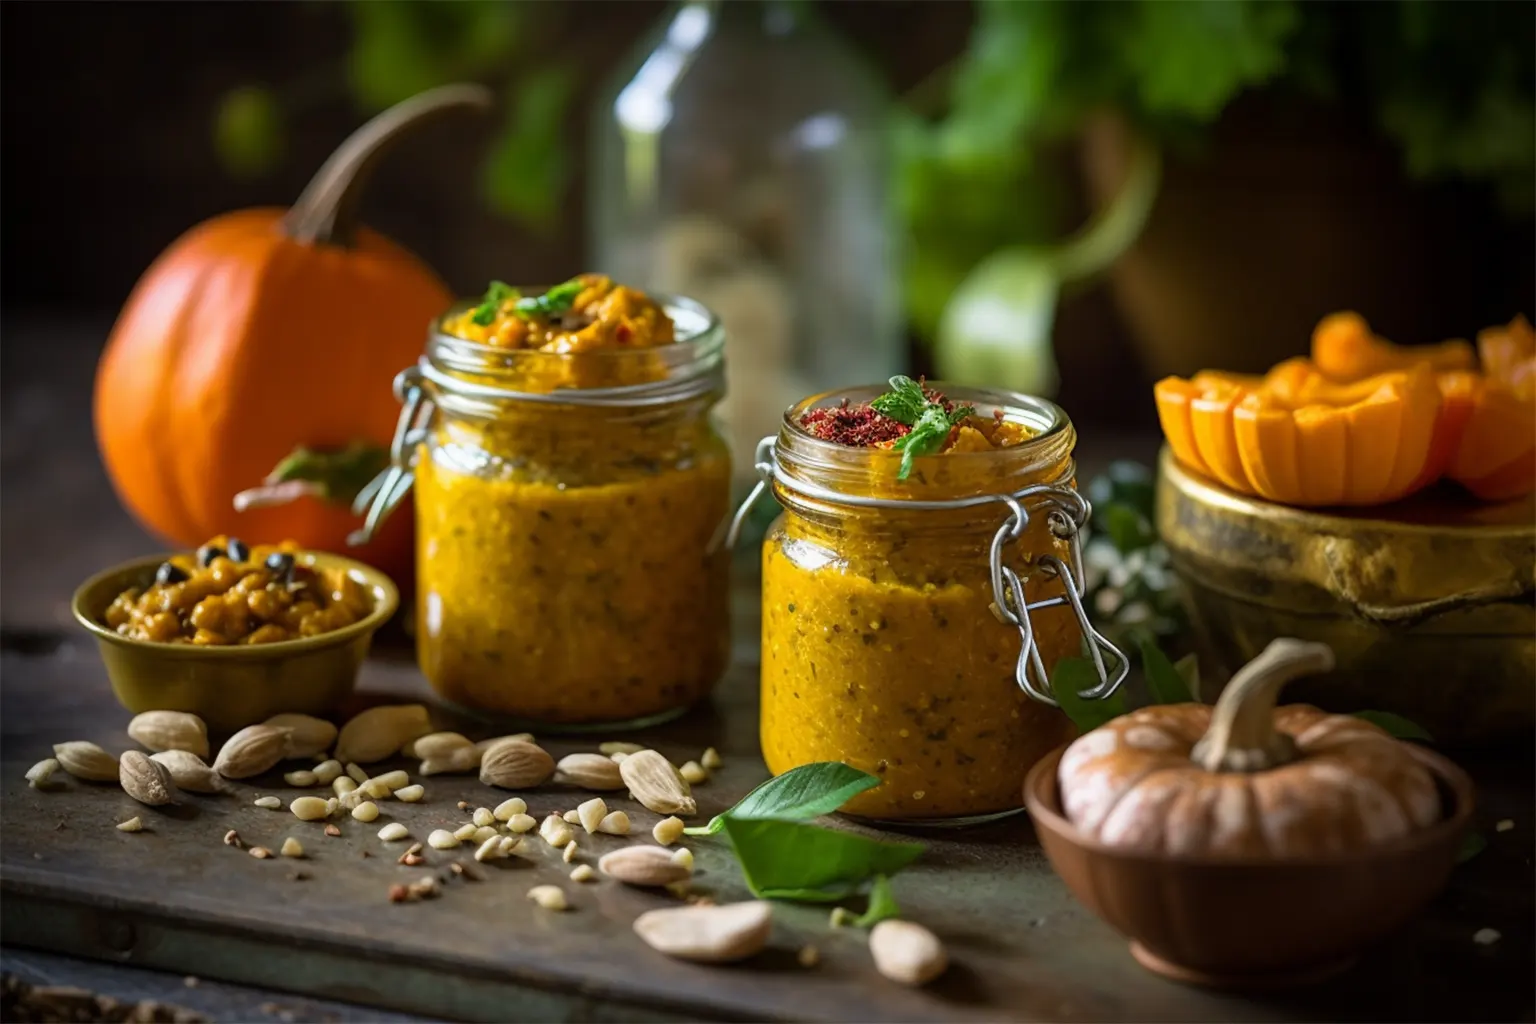 Pumpkin-Cashew Pesto with Toasted Bread